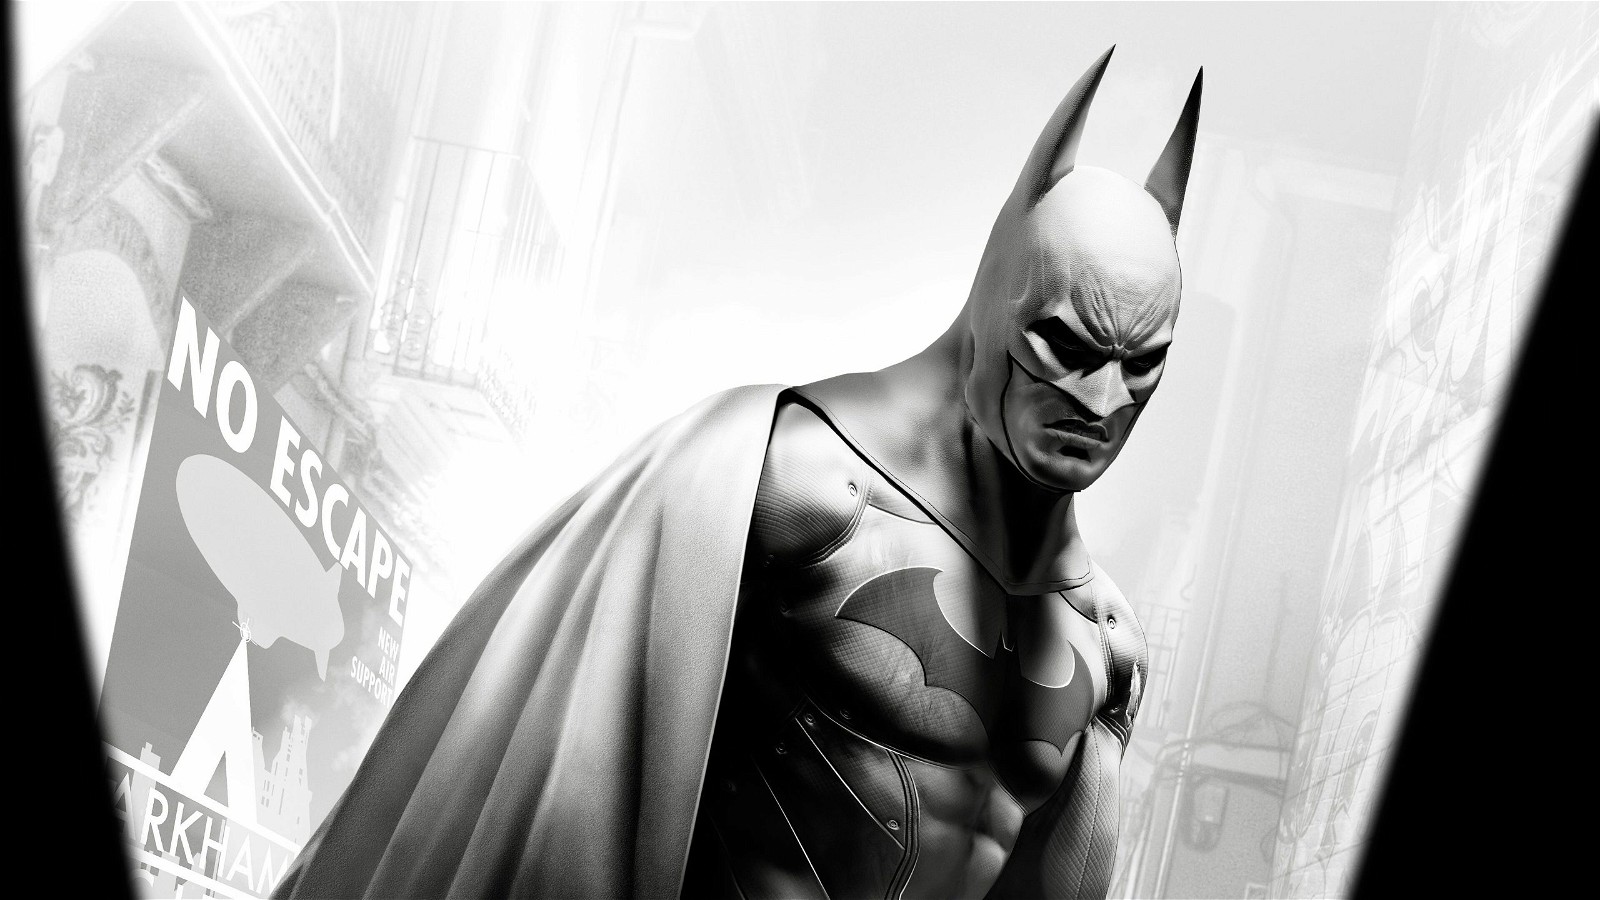 Some consider Batman Arkham City to be the best hero game of all time, will it last?